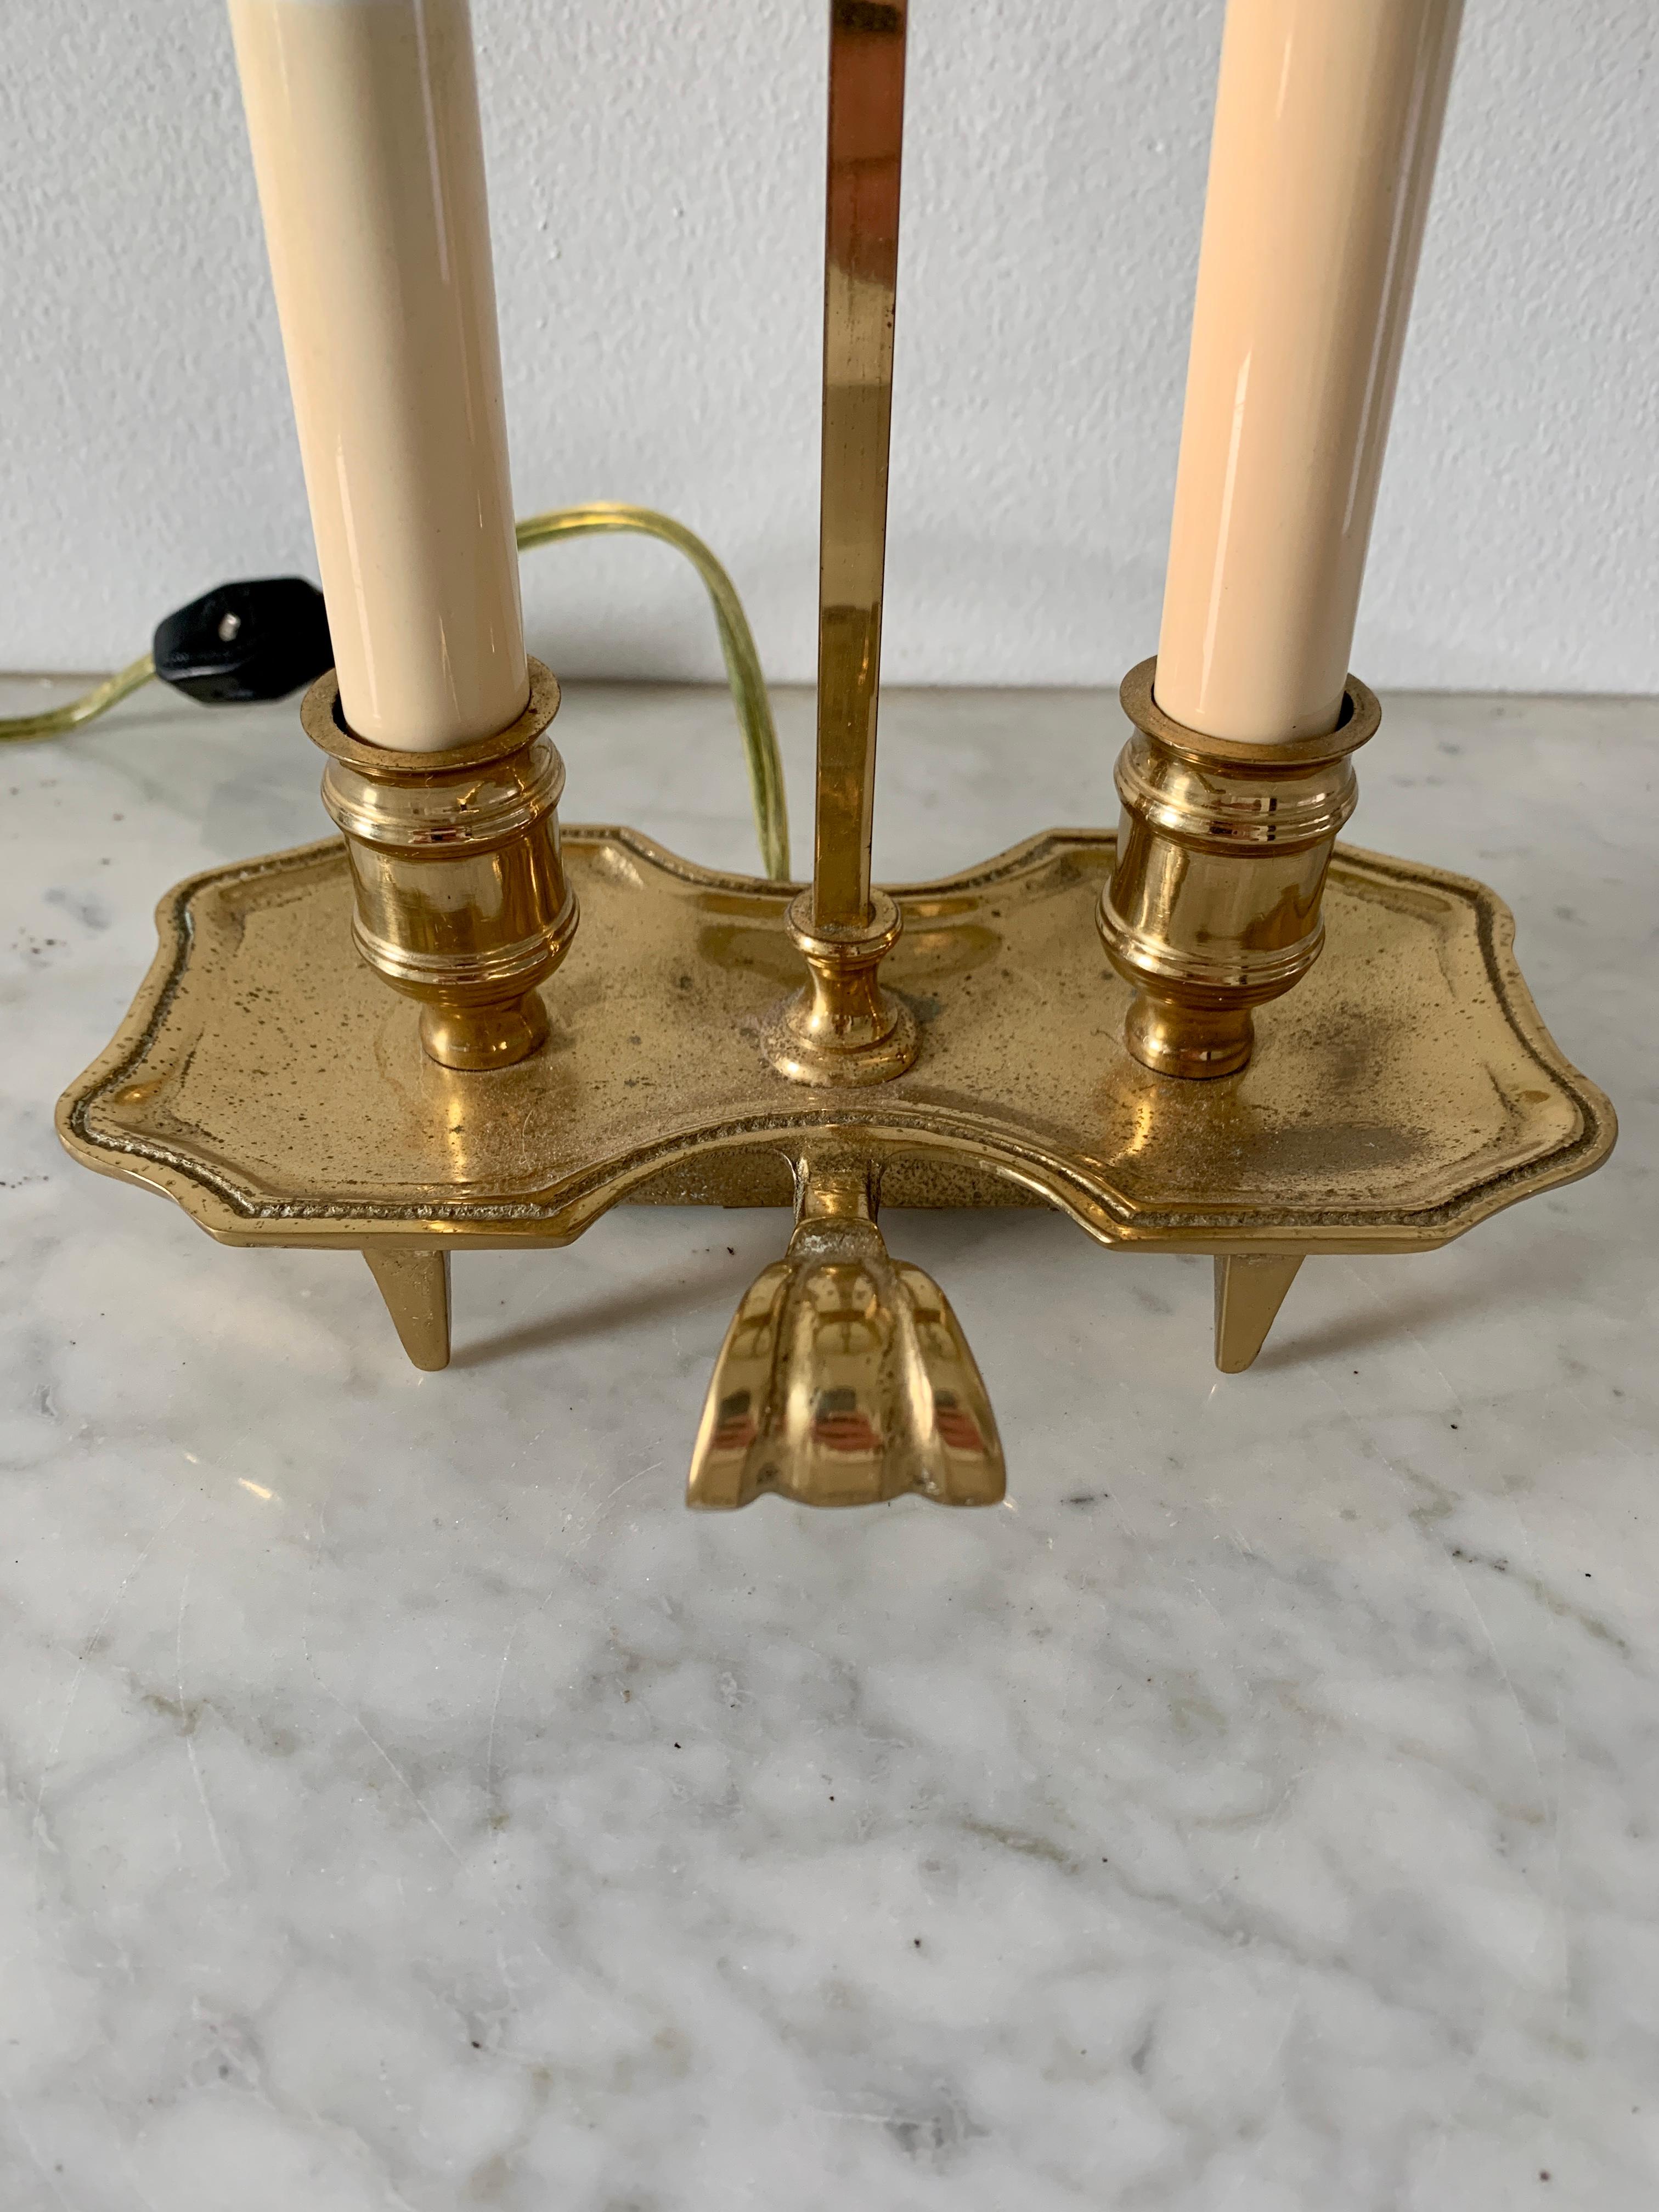 French Provincial Mid-20th Century Brass Bouillotte Lamp with Black Tole Shade